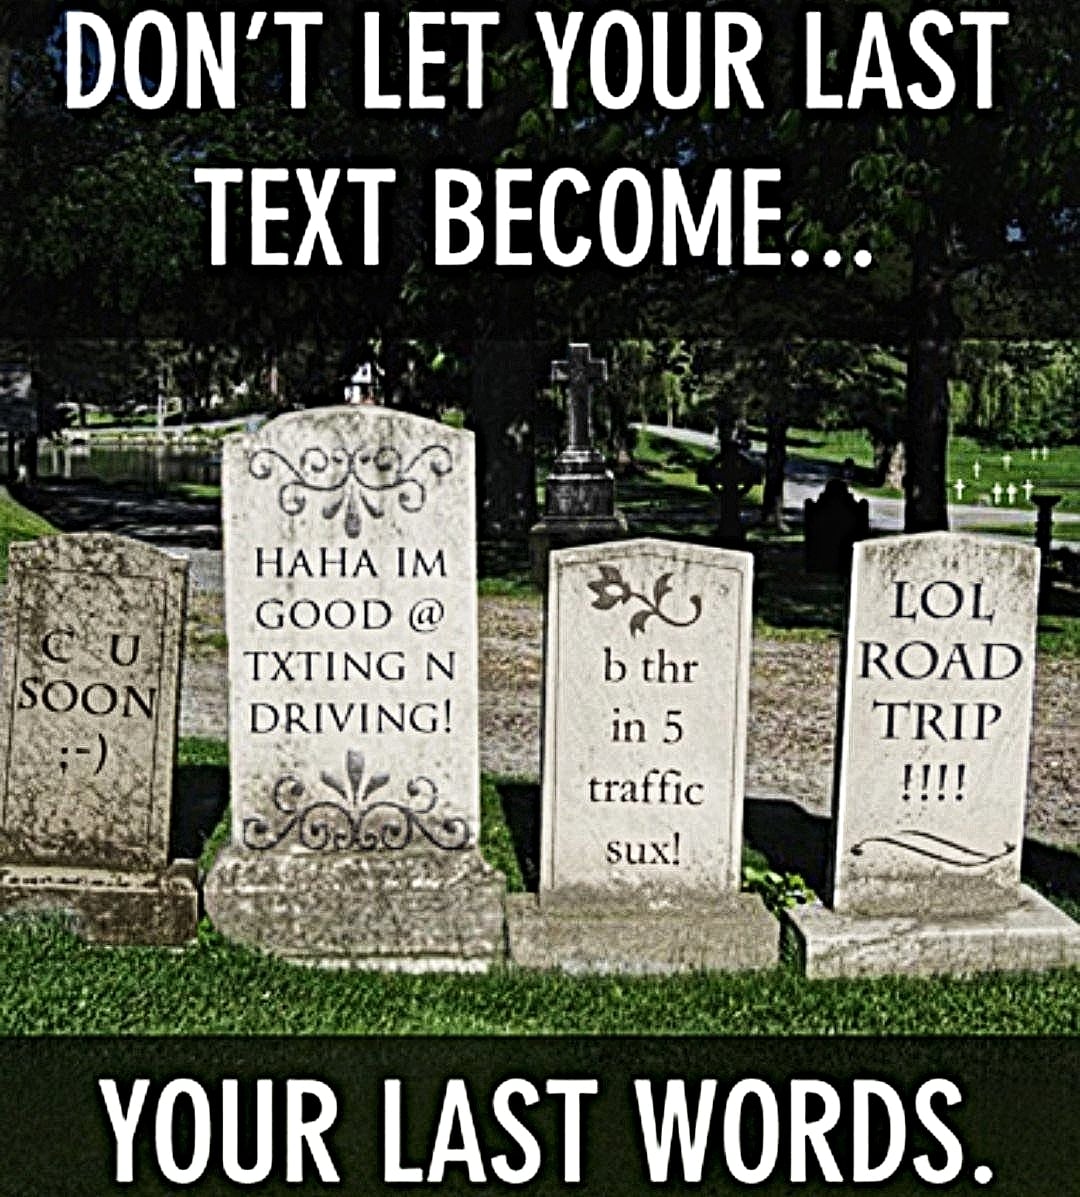 Driving and texting? Thus month it could get you a hexing. #besmartbesafe #RoadSafety #ditchthedistractions